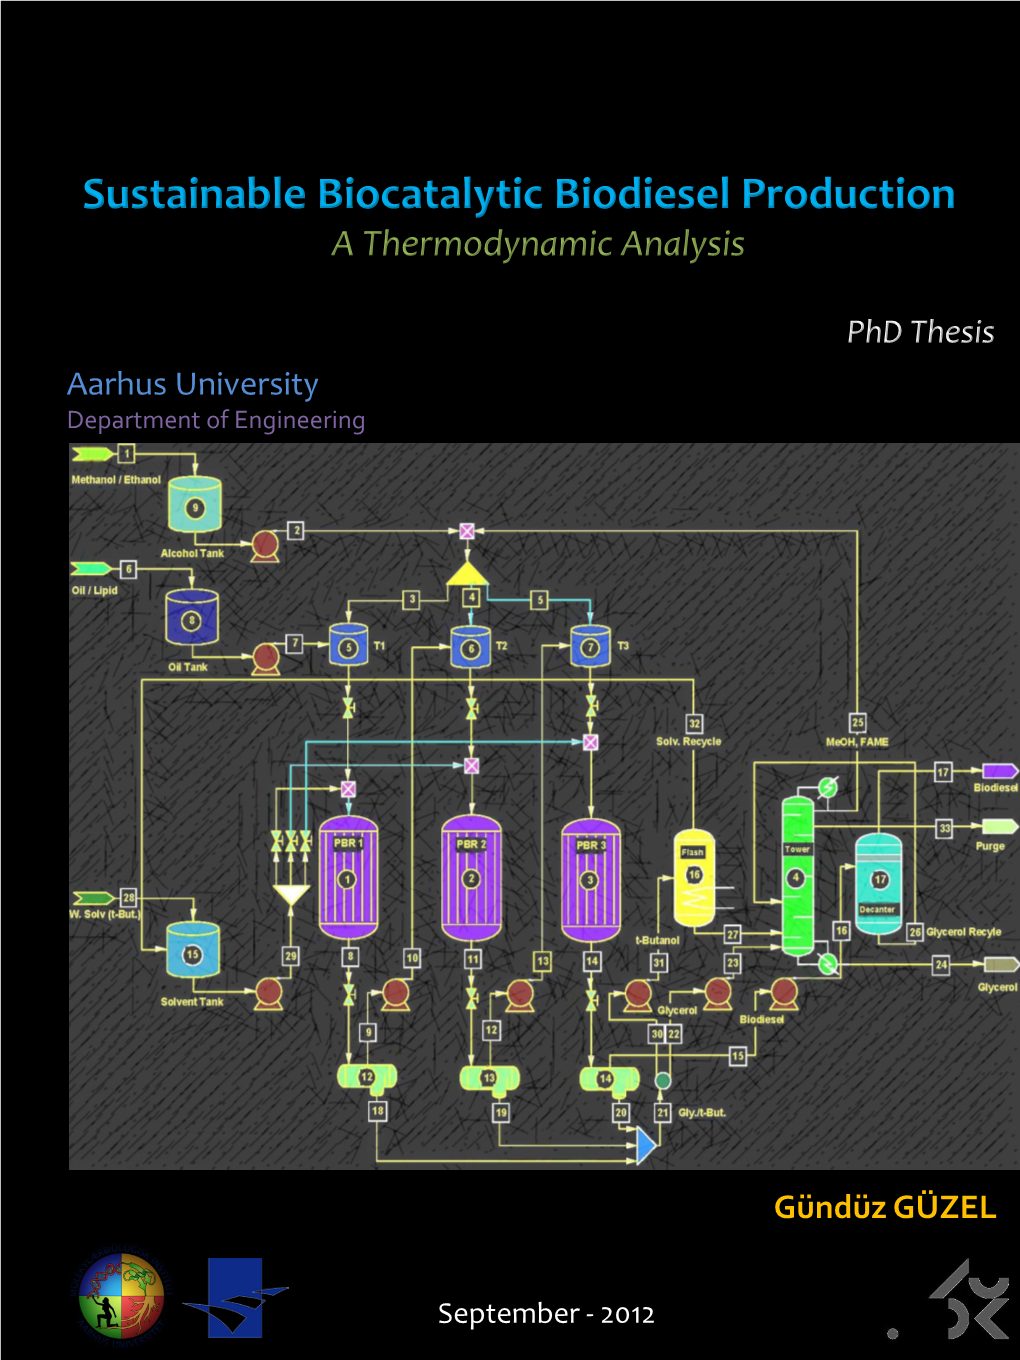 Sustainable Biocatalytic Biodiesel Production a Thermodynamic Analysis